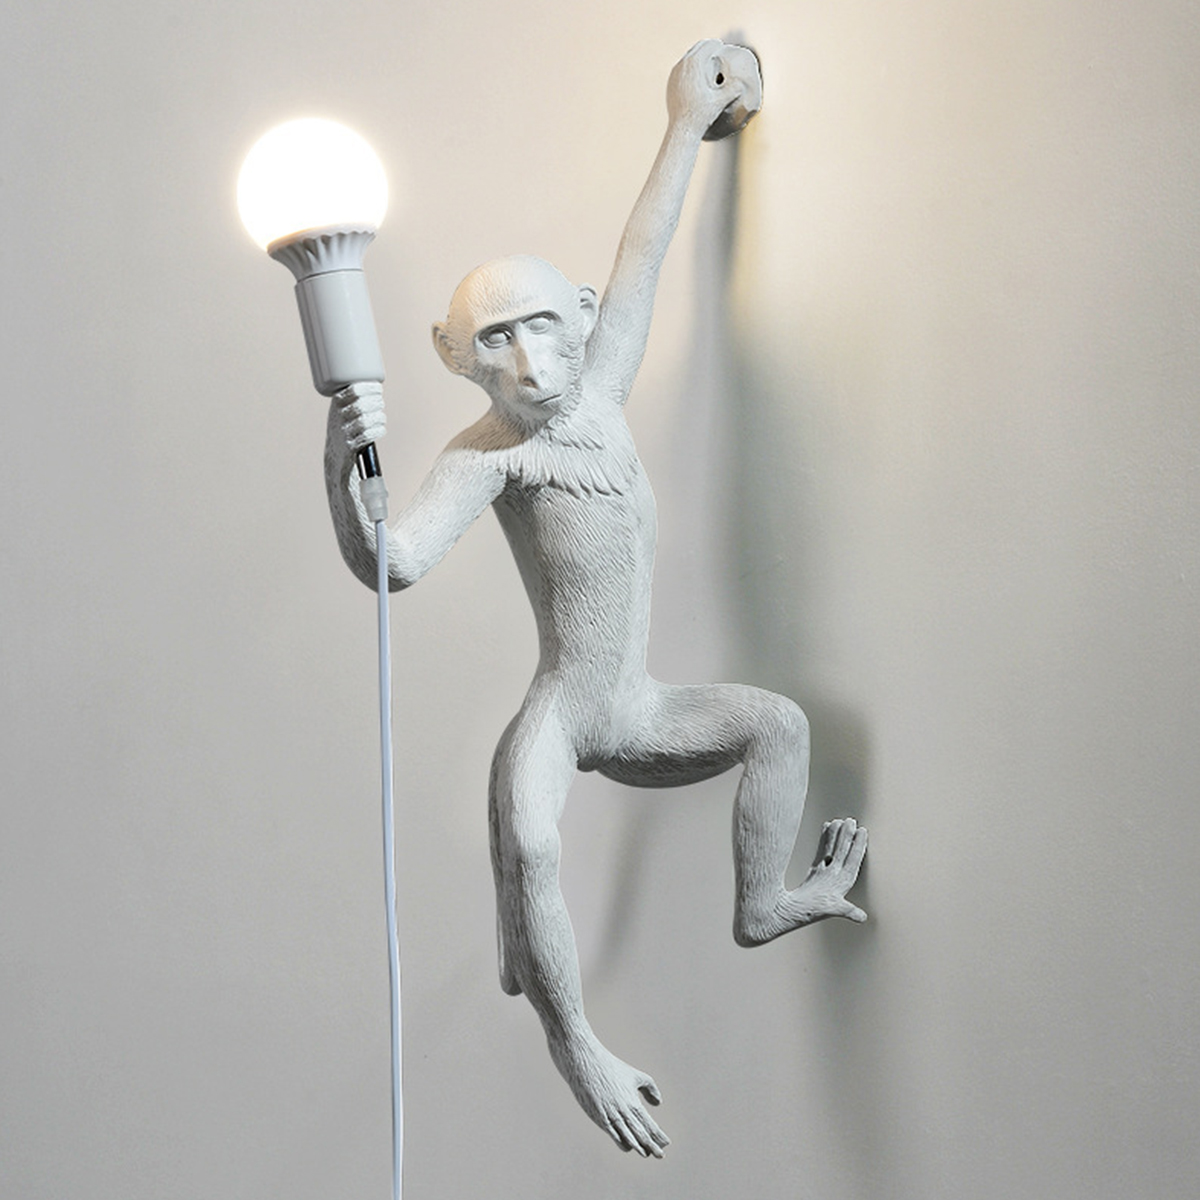 Find AnFeng Vintage Resin Hemp Rope Monkey Pendant Light Fixture Chandelier Industrial Retro Ceiling Pendant Lamp for Dining Living Room Bedroom Bar Cafe for Sale on Gipsybee.com with cryptocurrencies